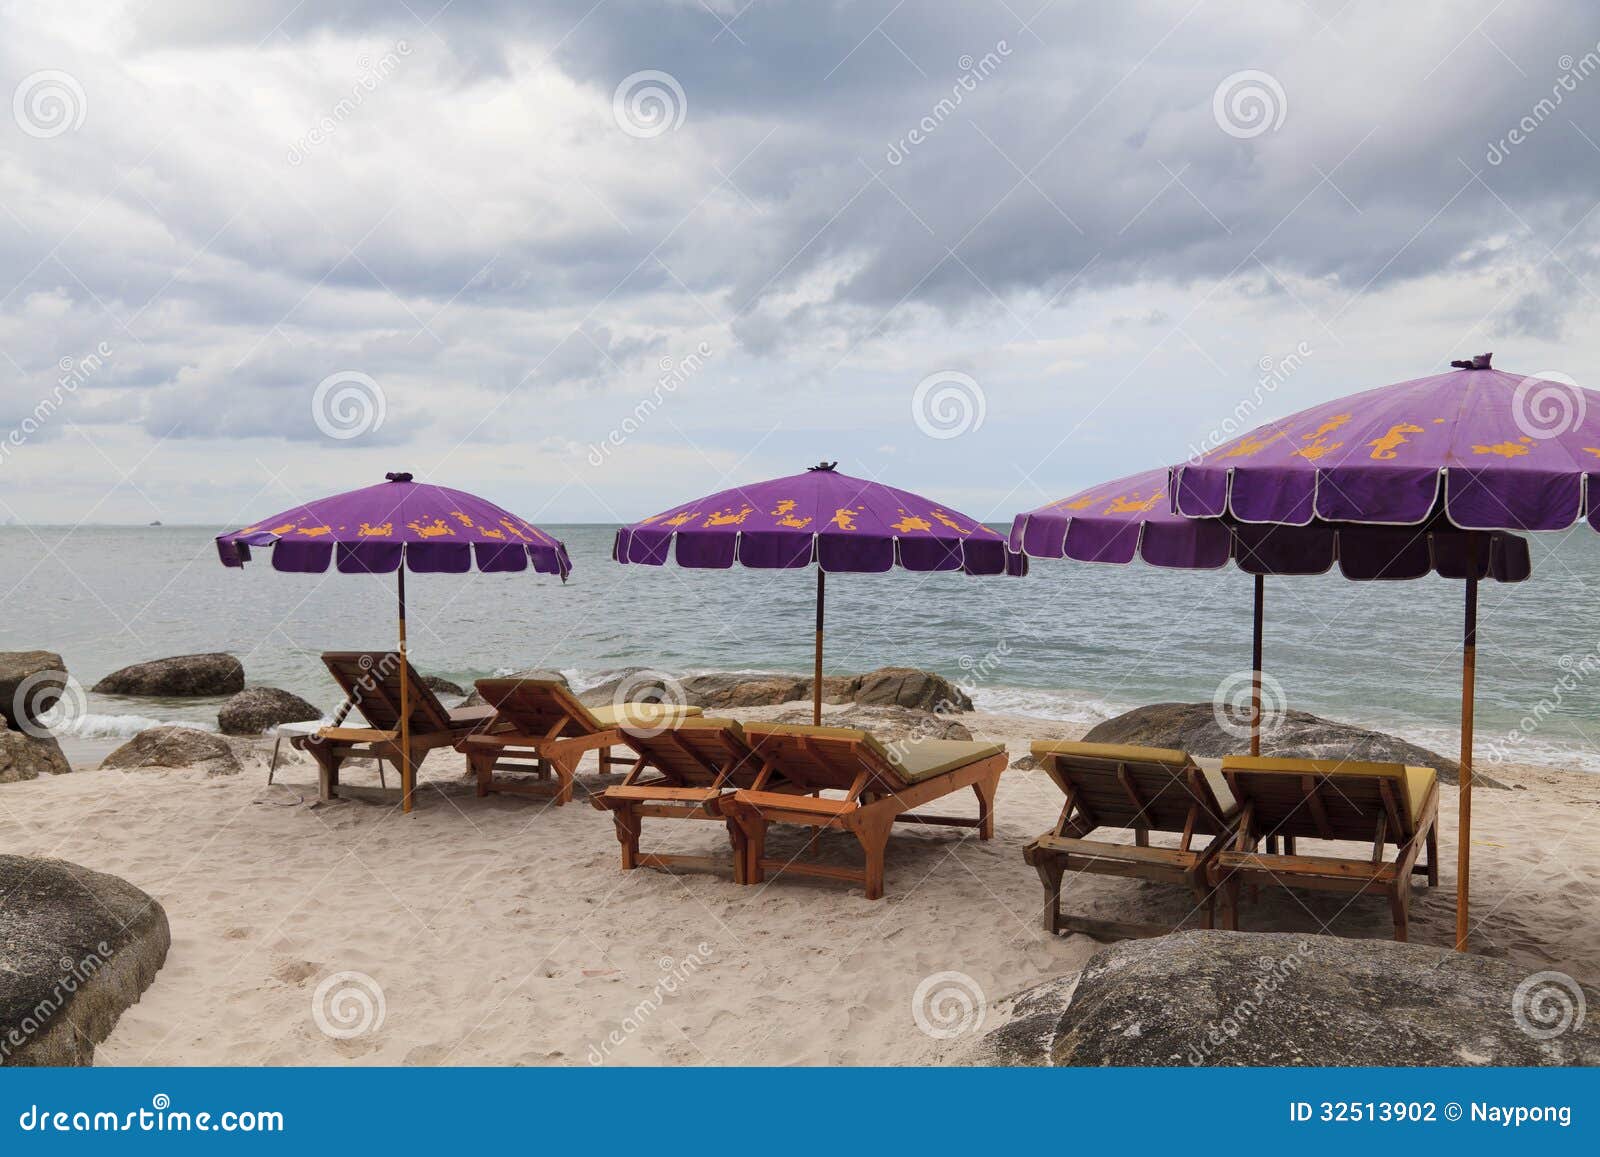 Beach chairs with umbrella stock photo. Image of paradise - 32513902